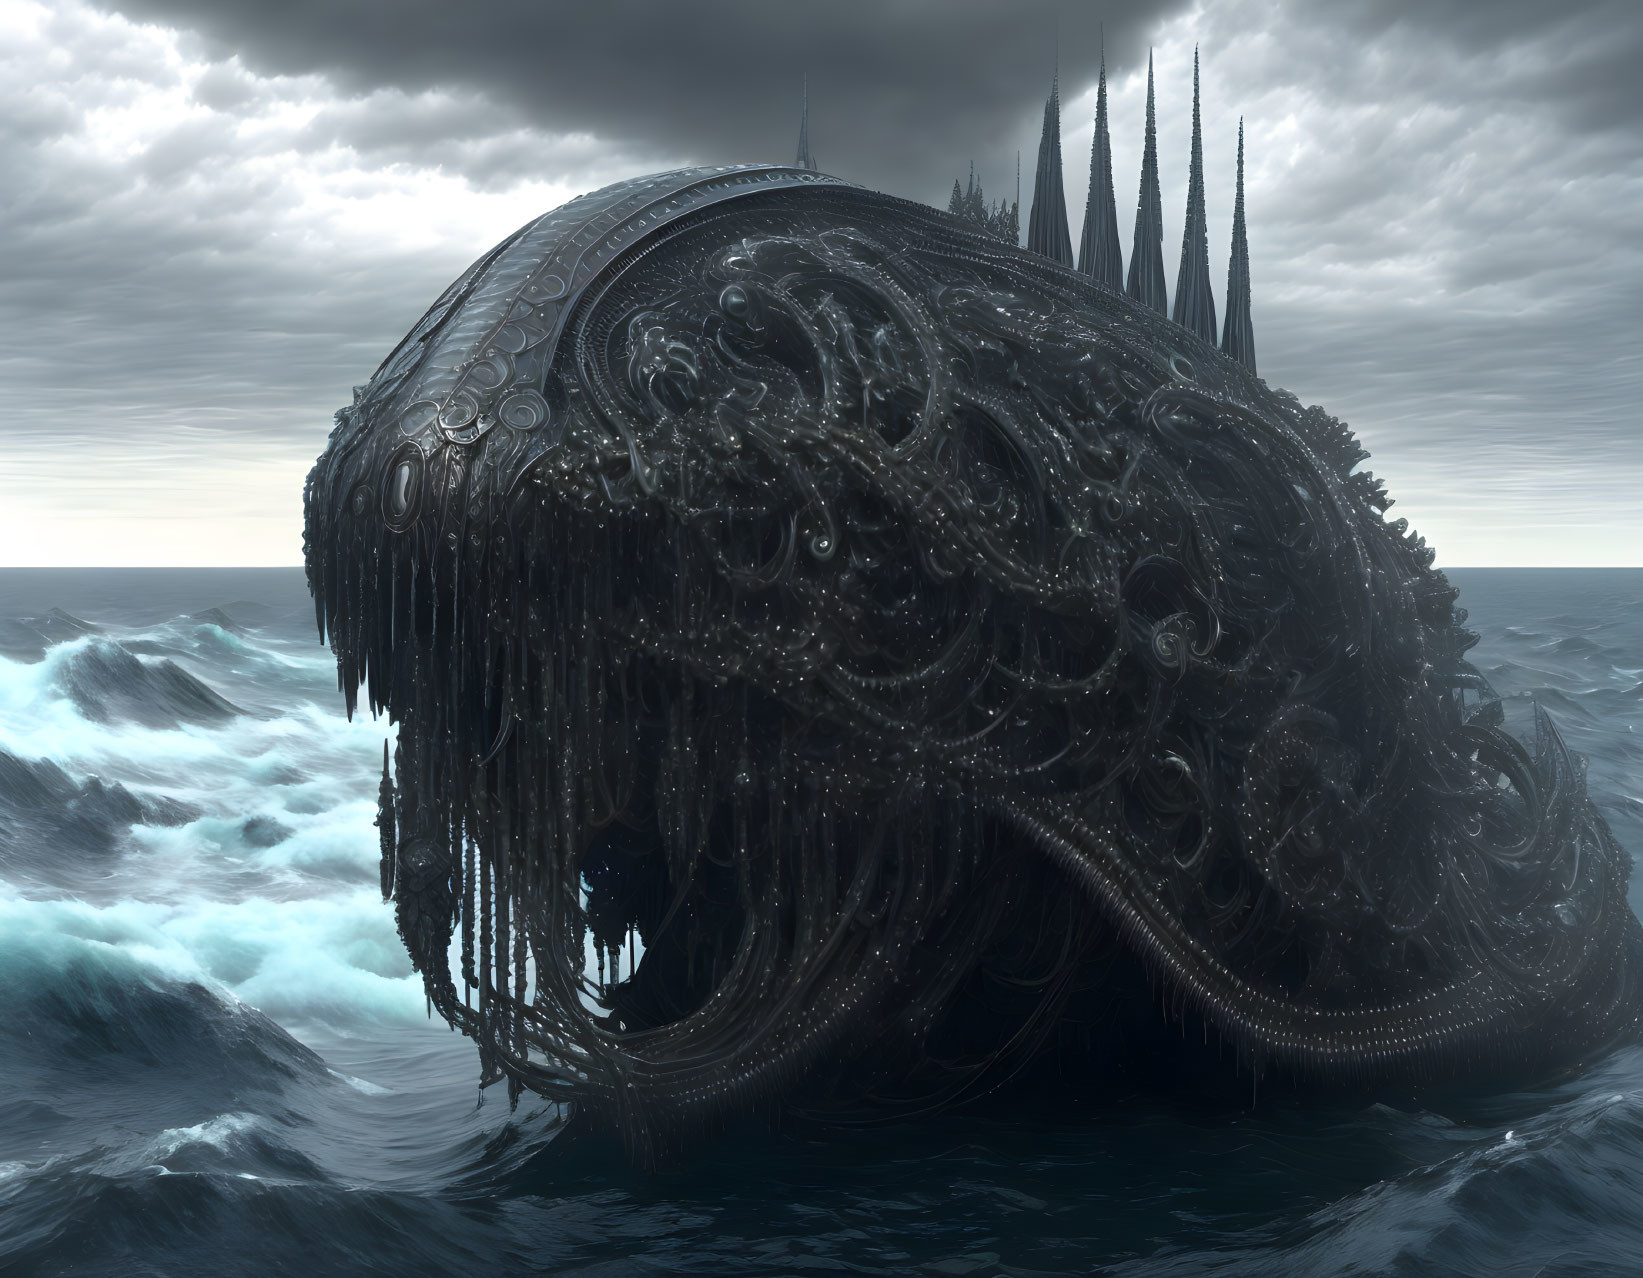 Gigantic cephalopod-like creature in stormy sea with intricate tentacles and towers